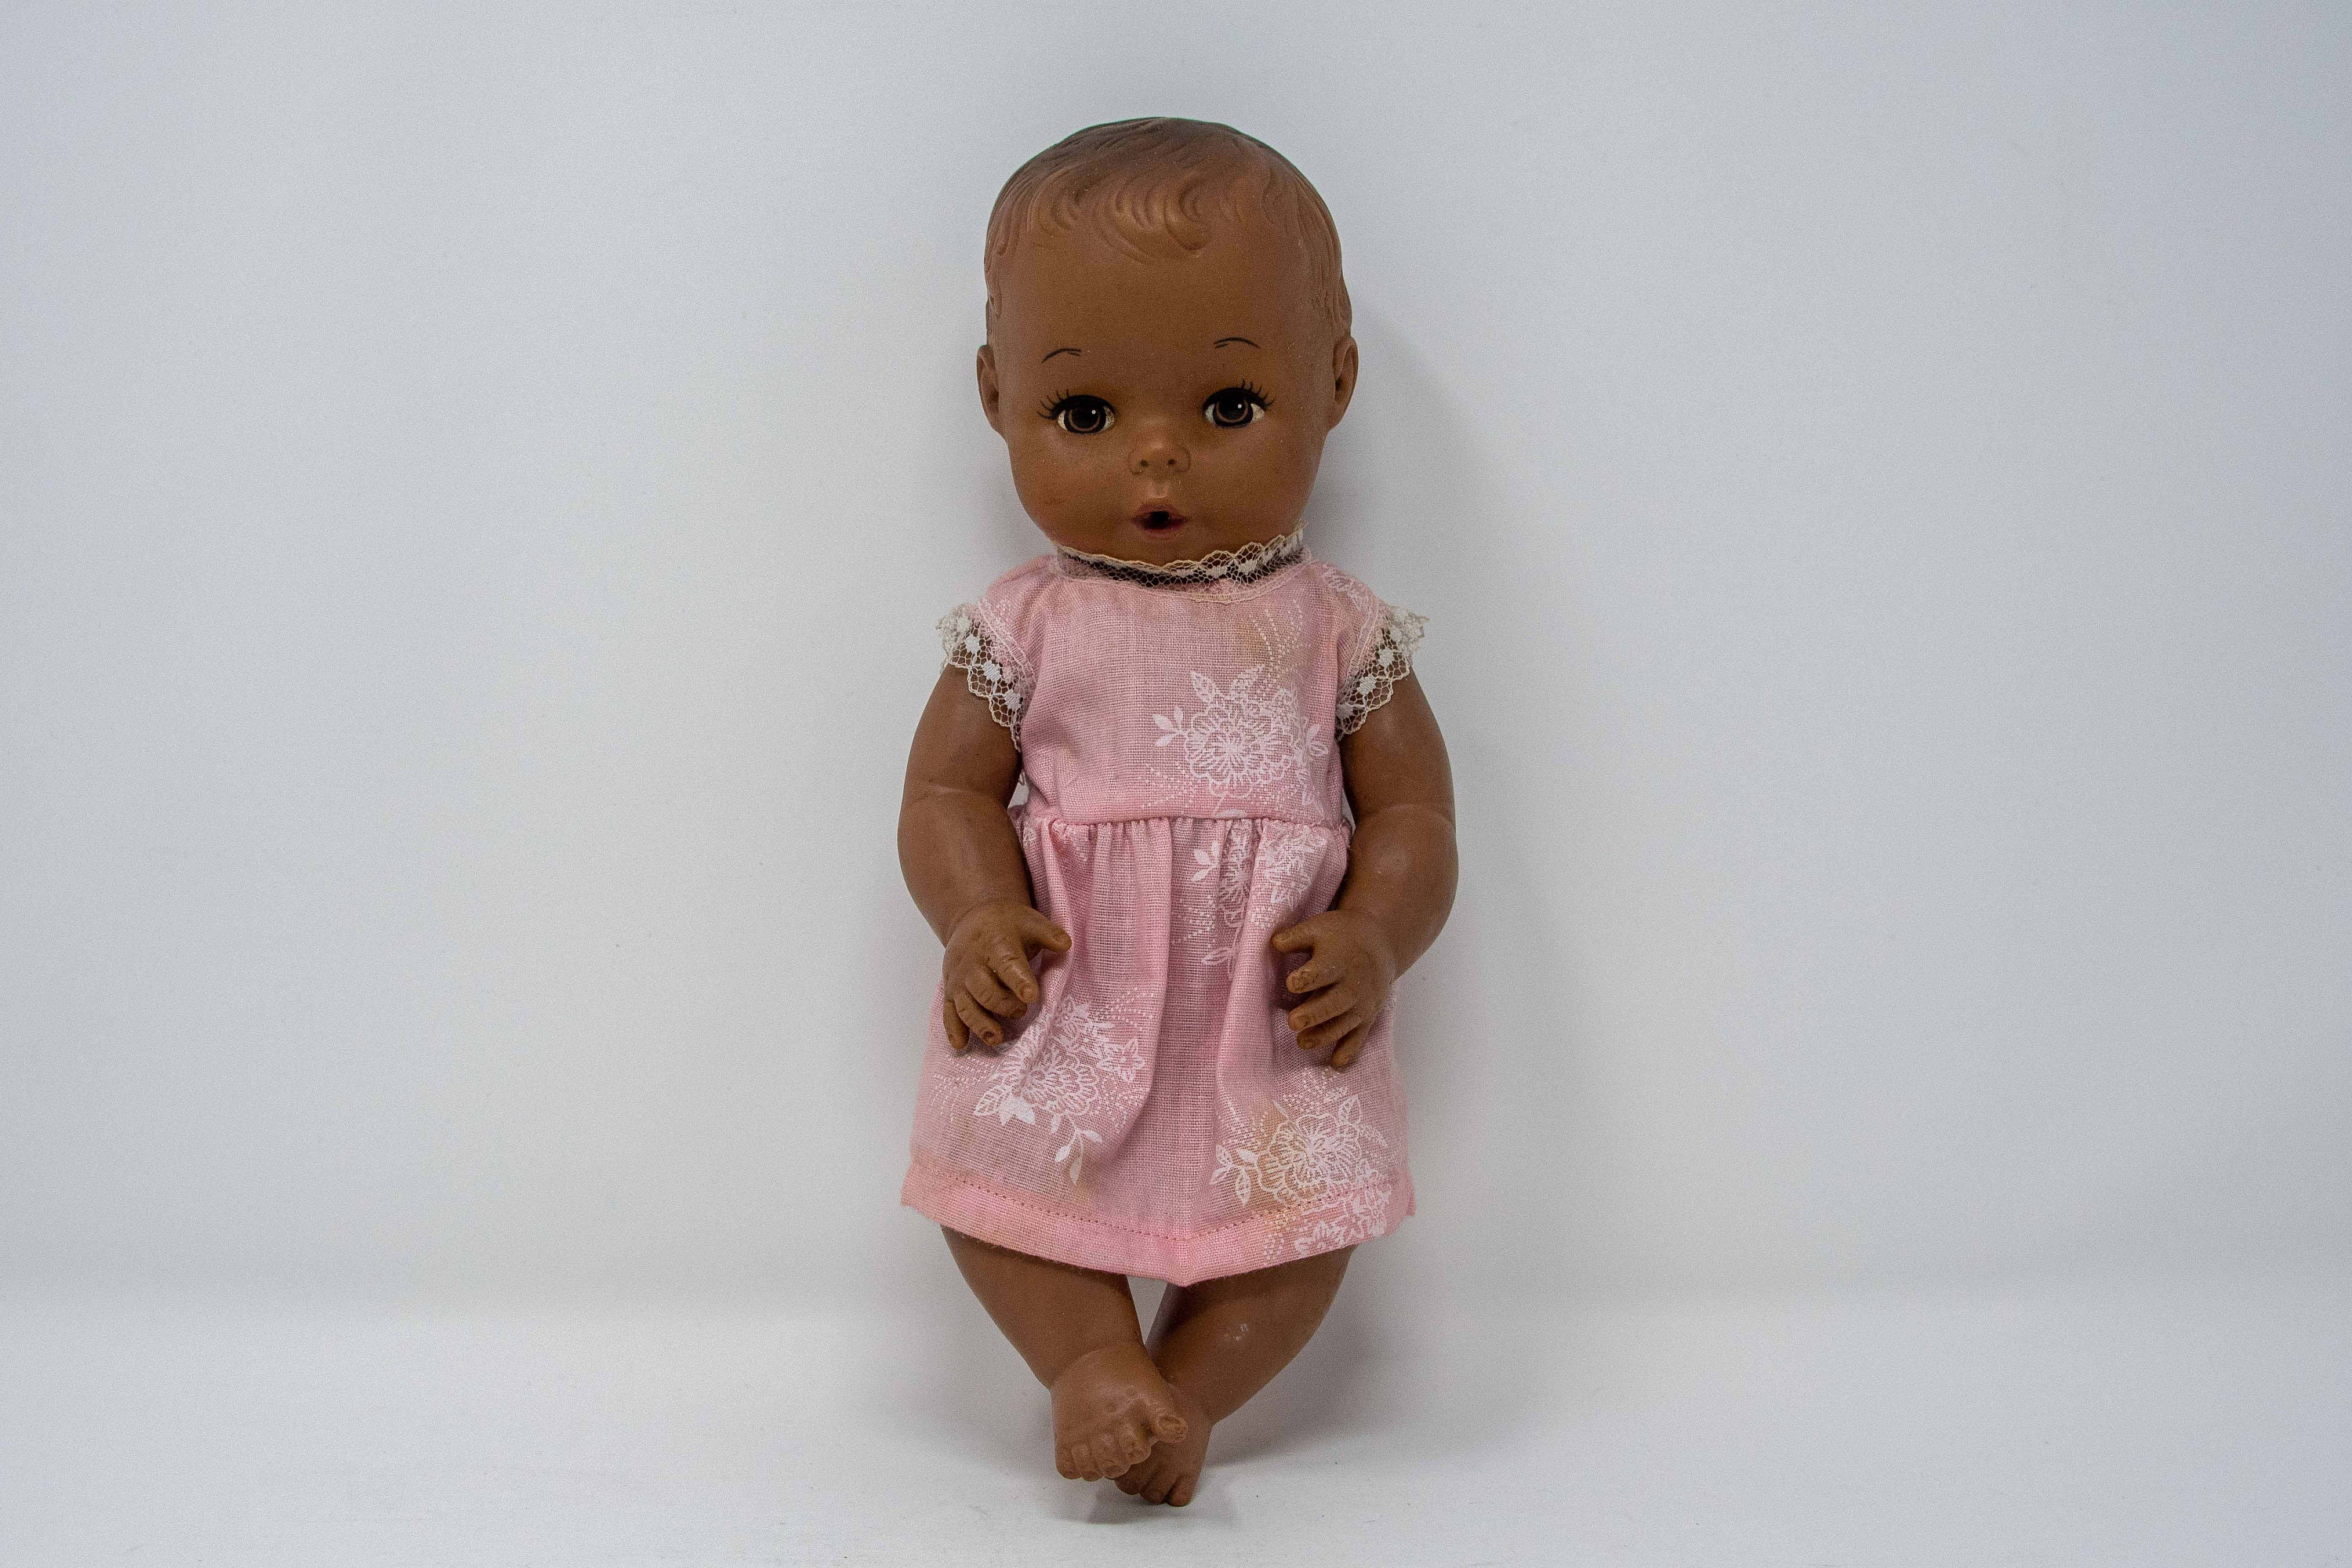 1950s Baby Doll Porn - Vintage Baby Doll 1950s - Etsy